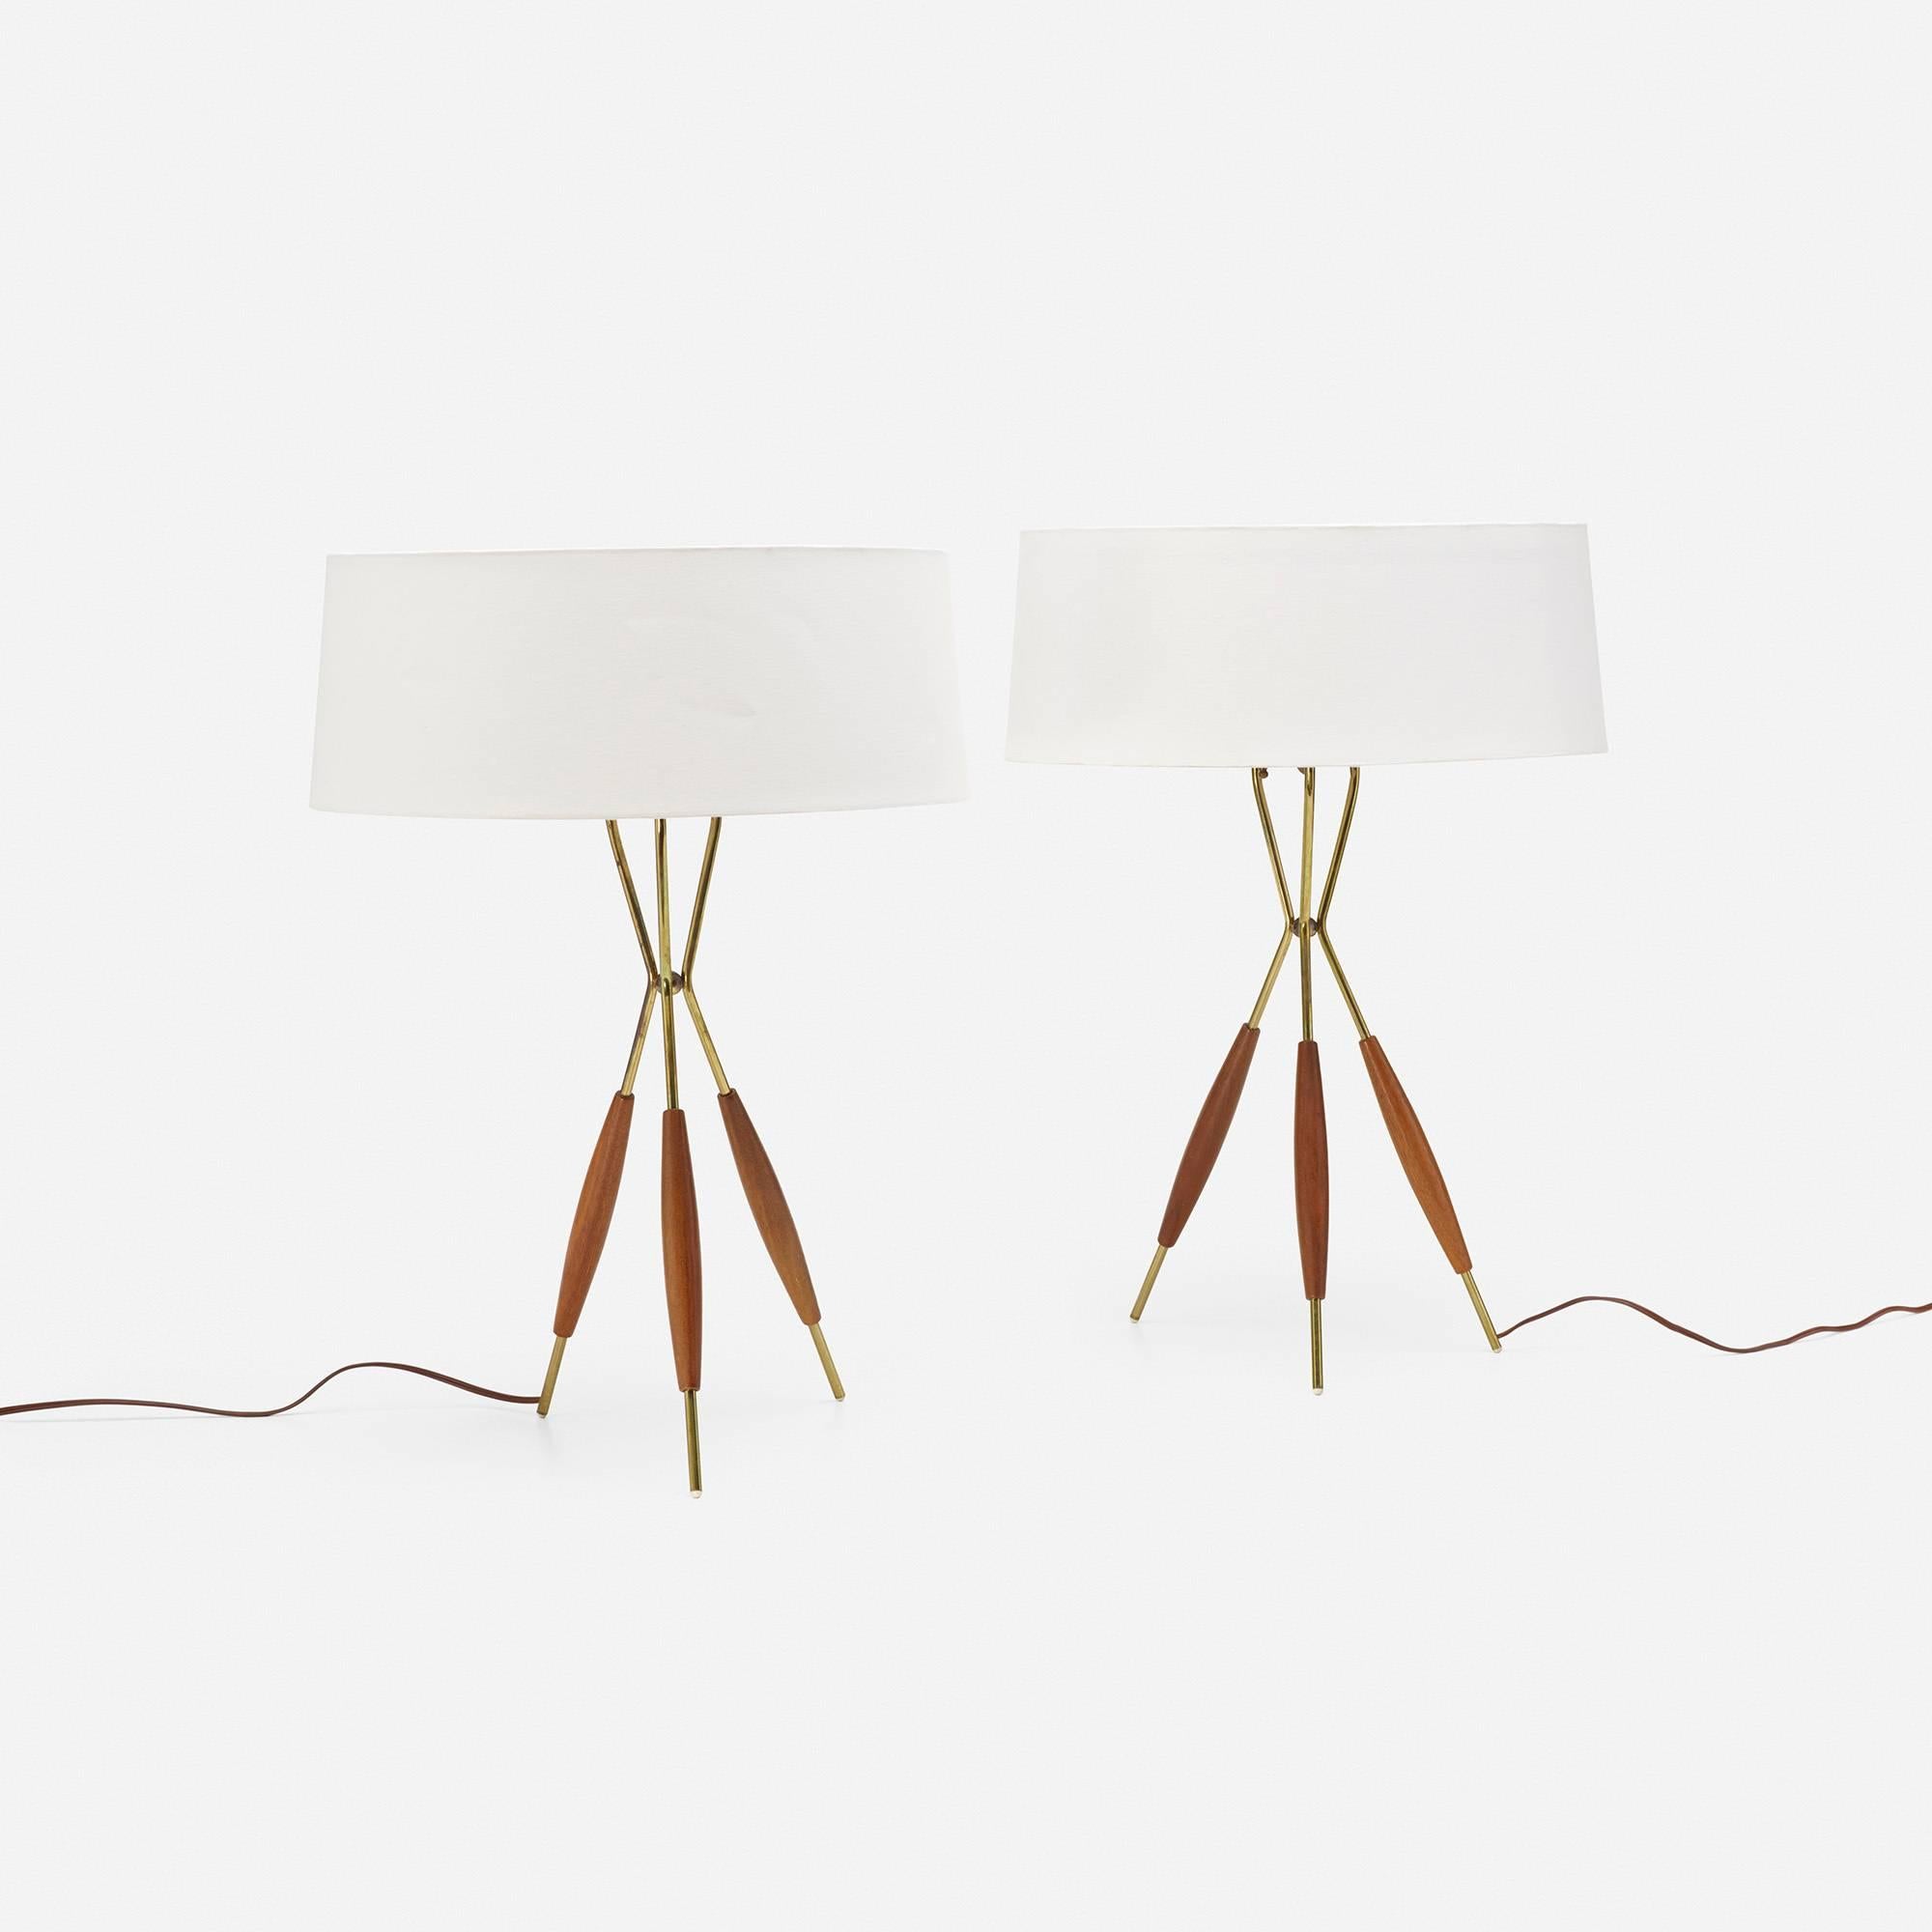 Classic Mid-Century lighting with walnut and brass accents.